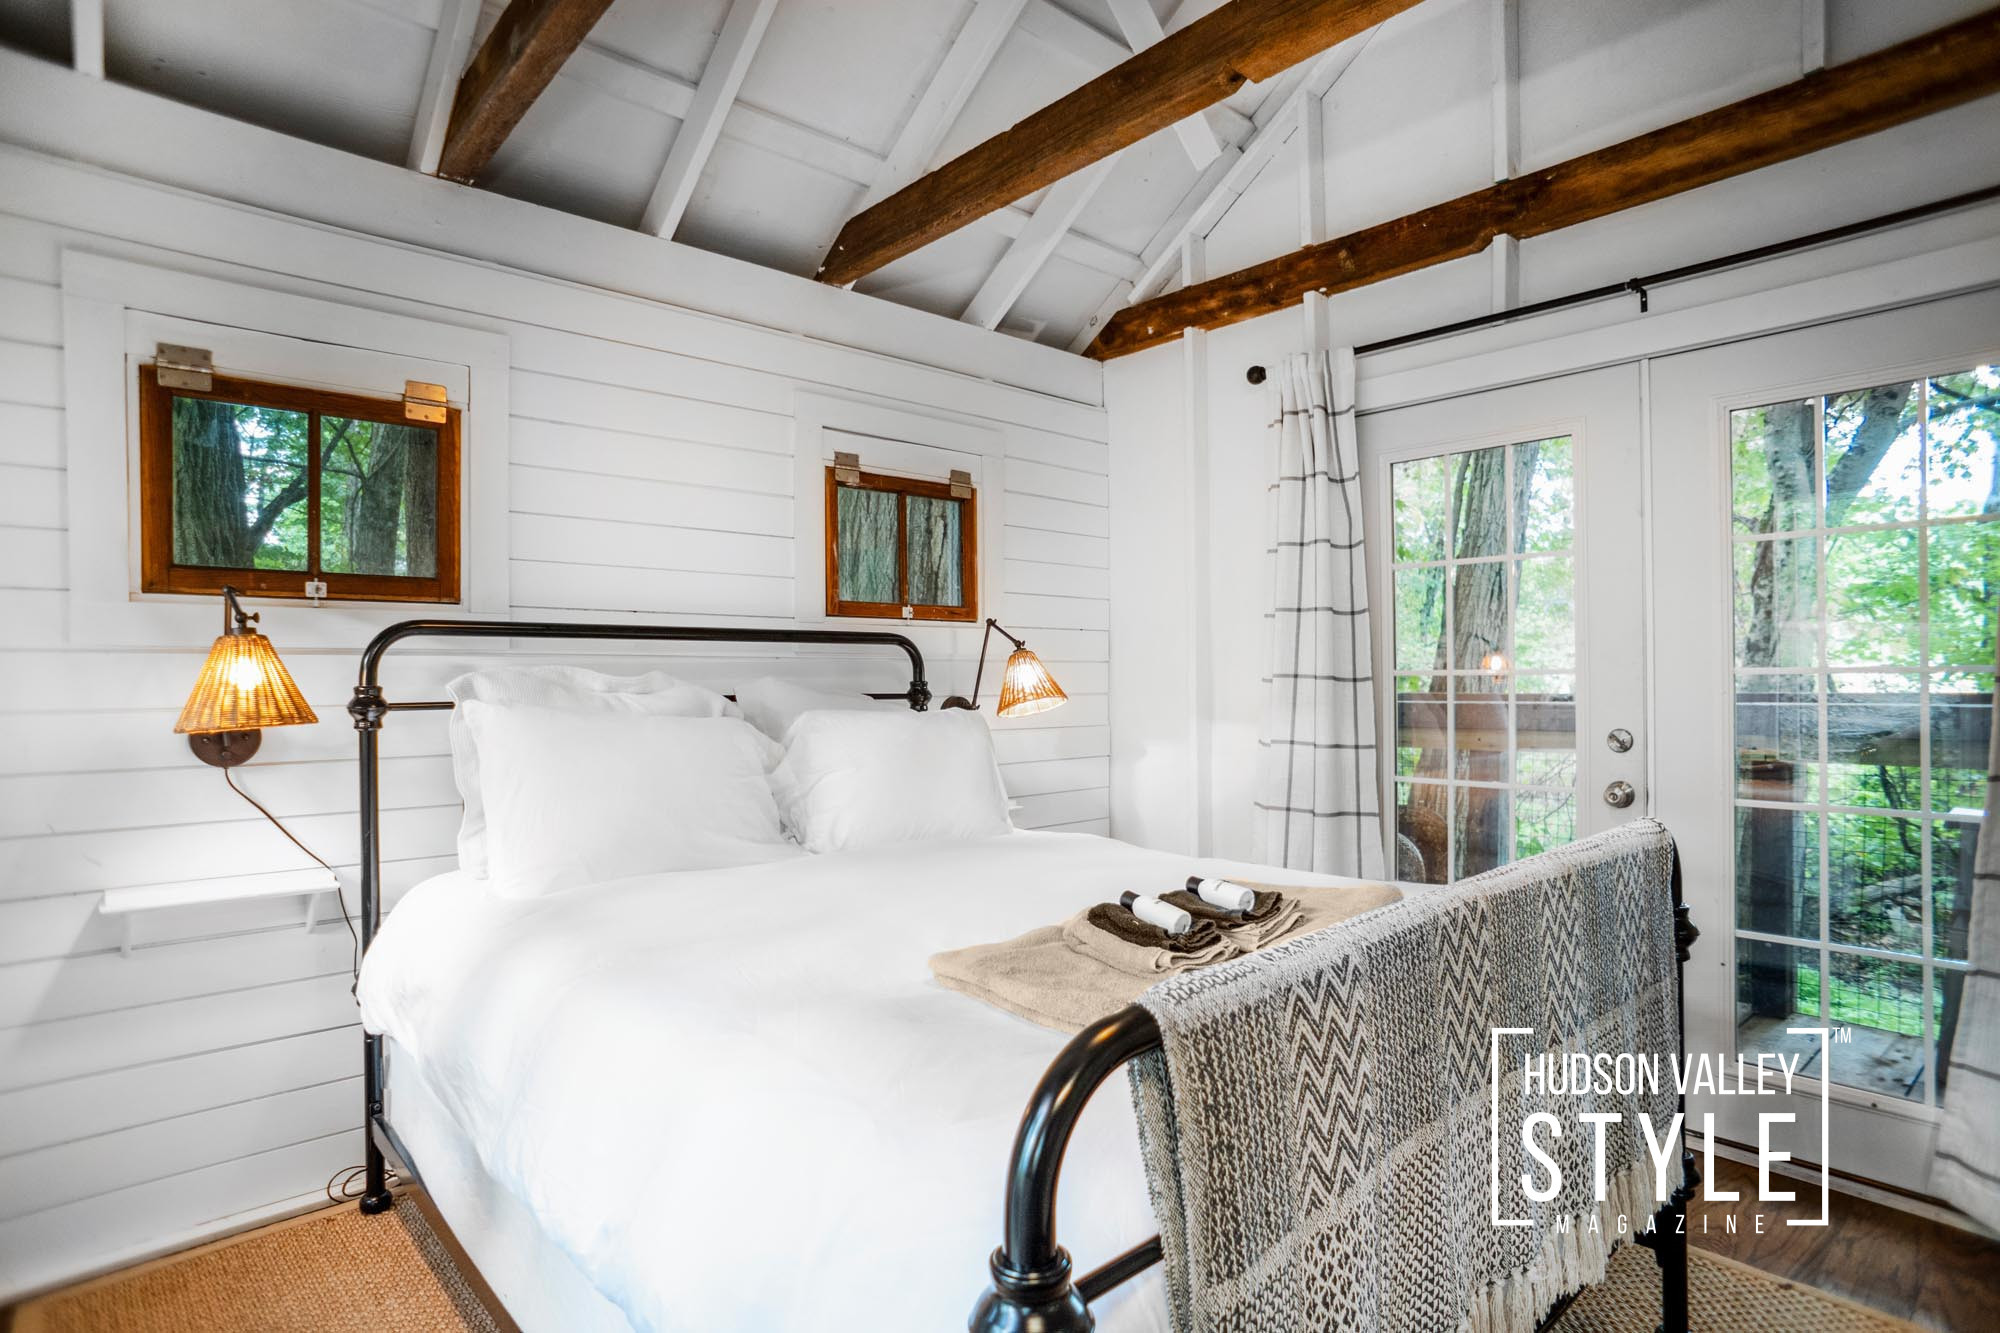 Apsley Hill Farm's Rustic Treehouse with a Claw Tub – Airbnb Review by Photographer Maxwell Alexander – Presented by ALLUVION MEDIA – The Best Airbnb Photography in the Hudson Valley, Catskills, NYC, and Hamptons